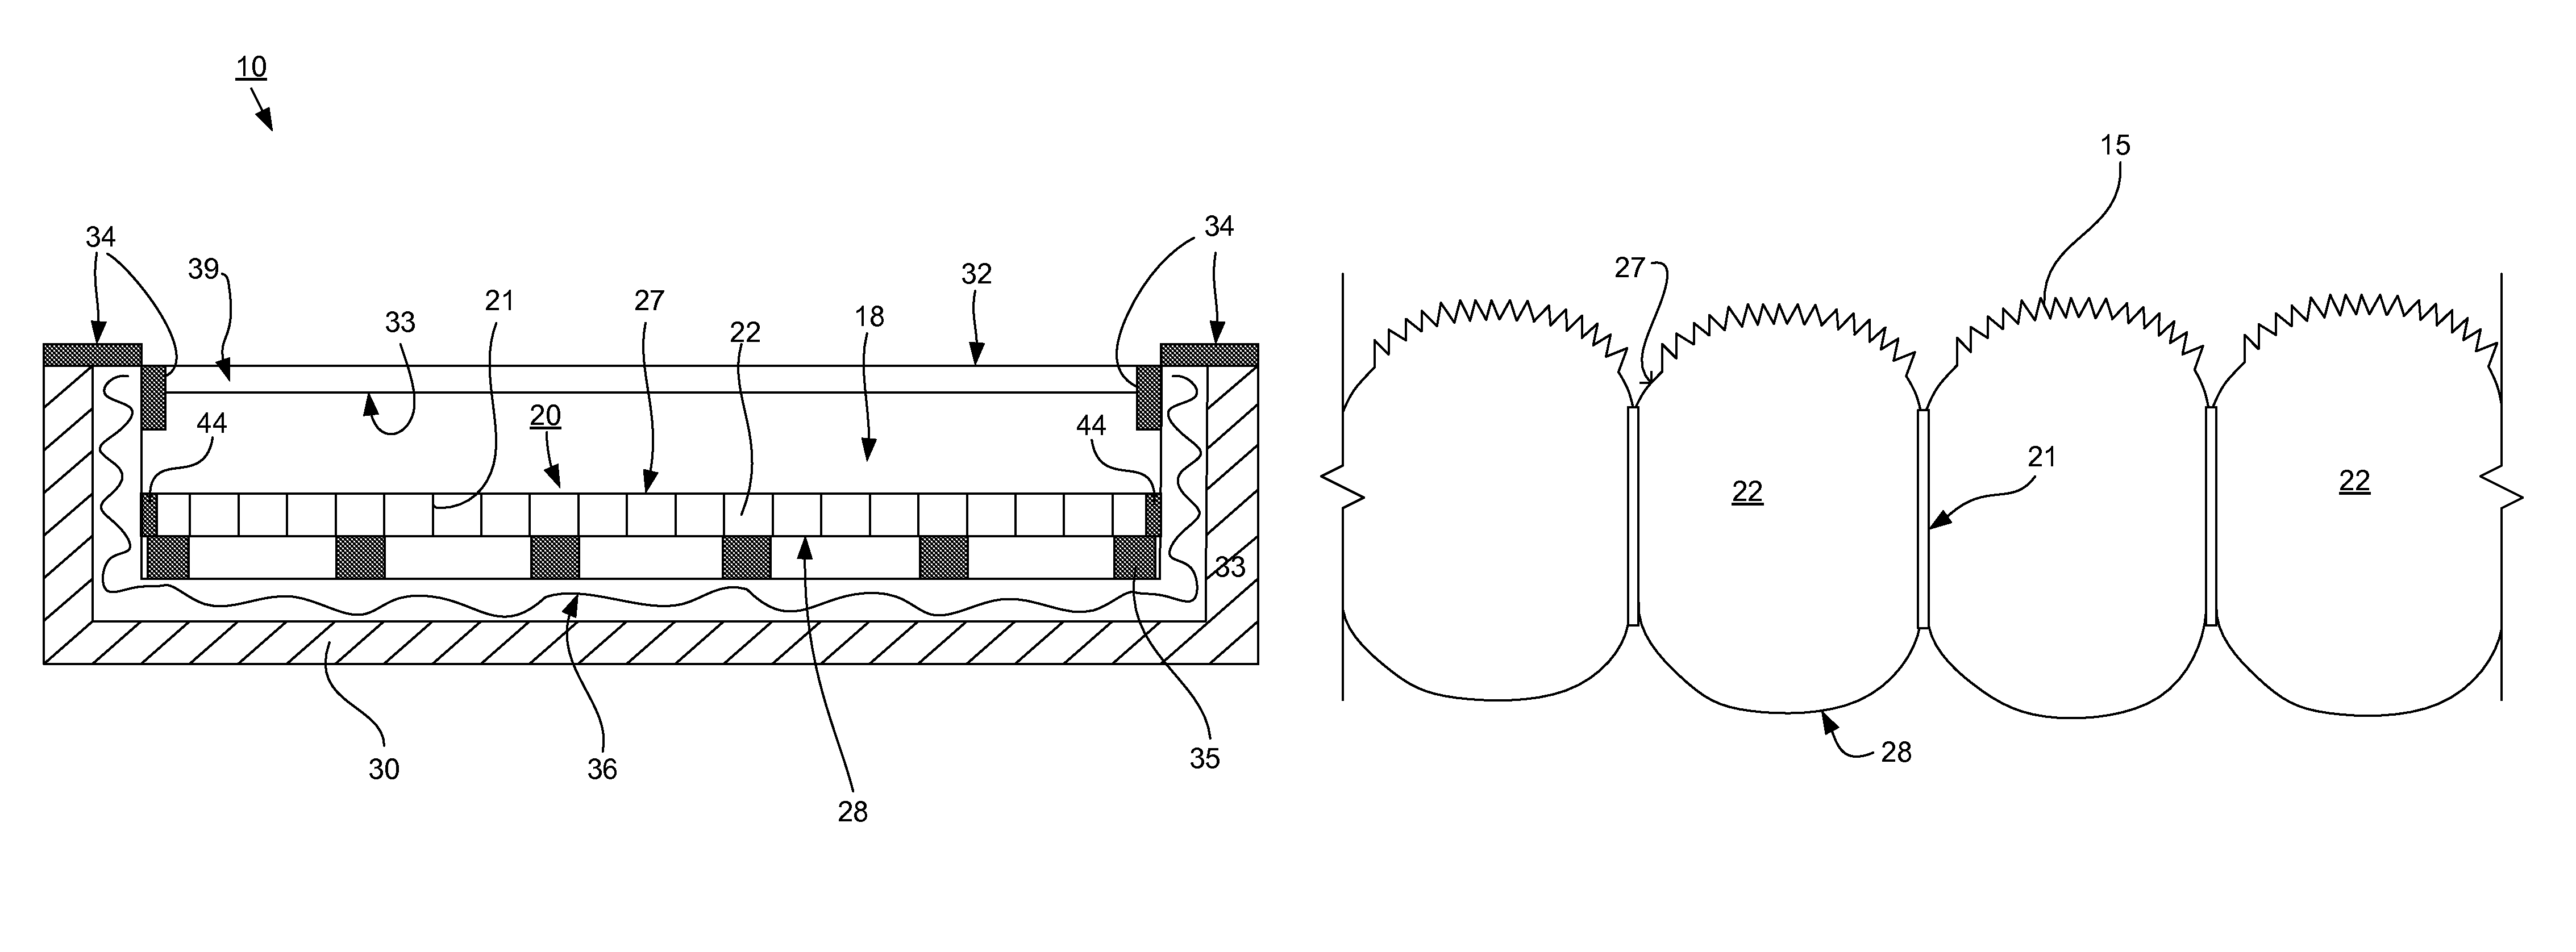 System for solar heating water using a glass absorber